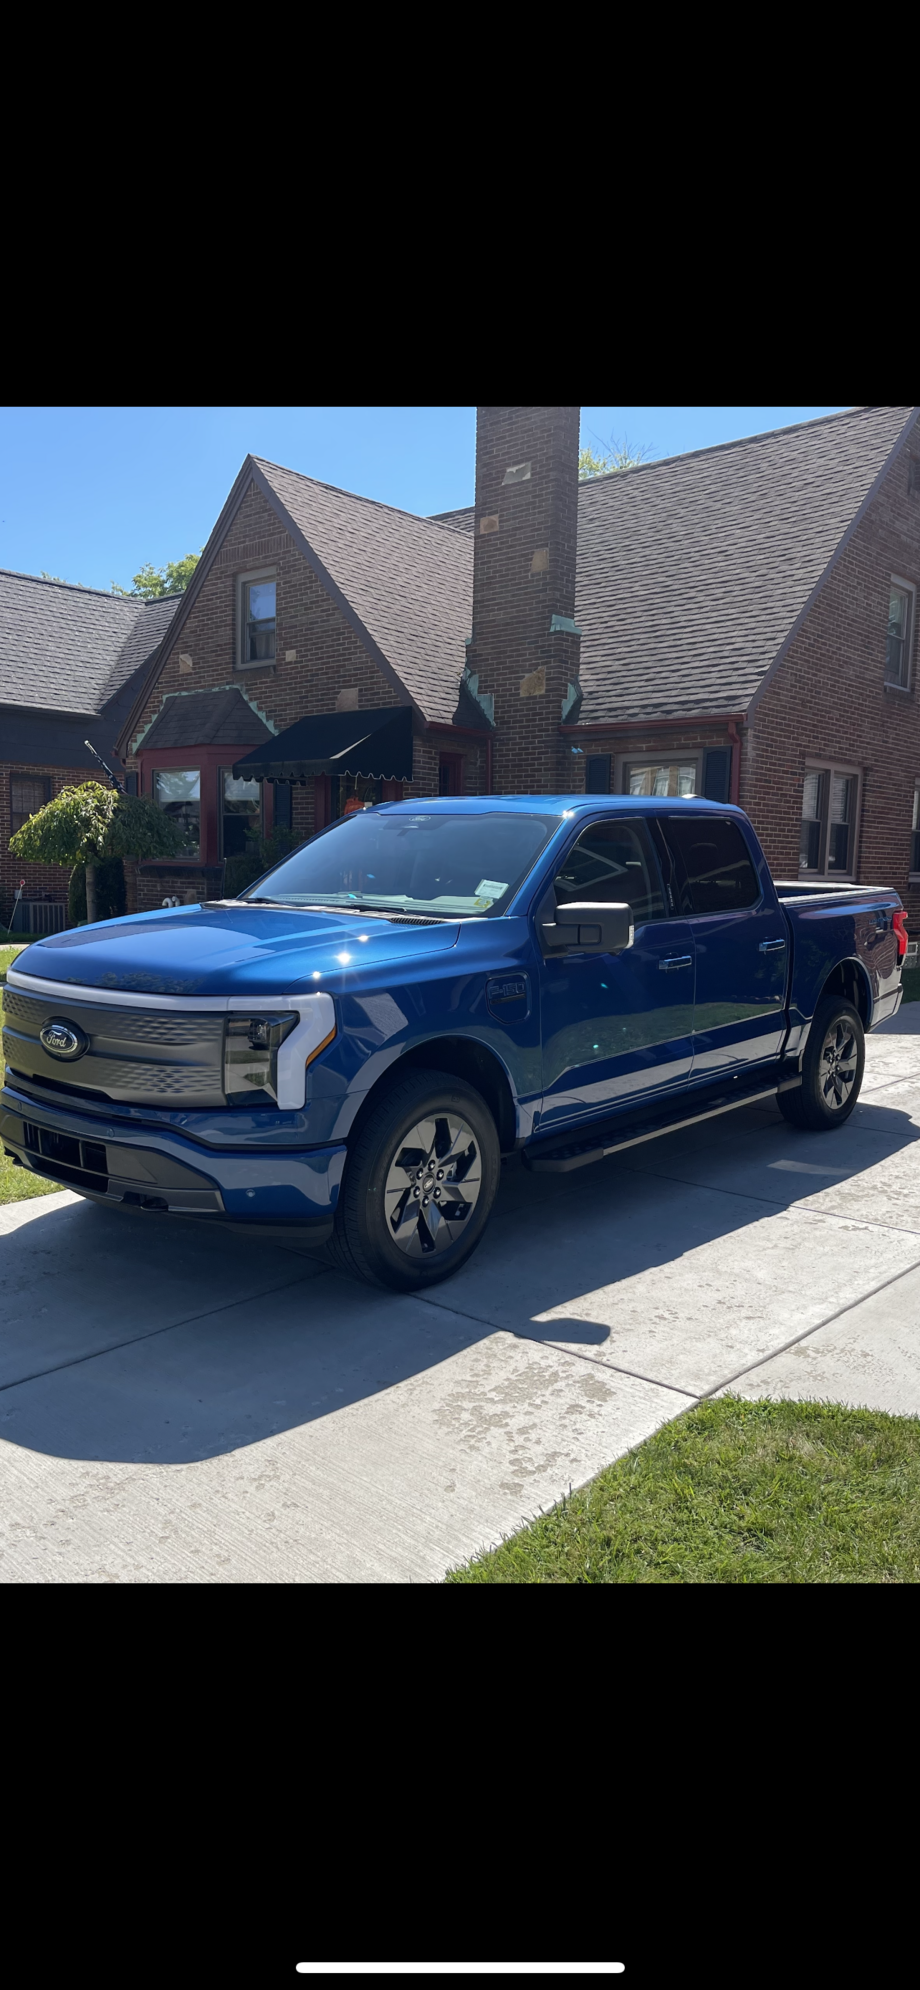 2022 Ford F-150 Lightning - 2022 F150 Lightning XLT - Used - VIN 1FTVW1EL2NWG06496 - 800 Miles - Other - AWD - Automatic - Truck - Blue - Buffalo, NY 14217, United States